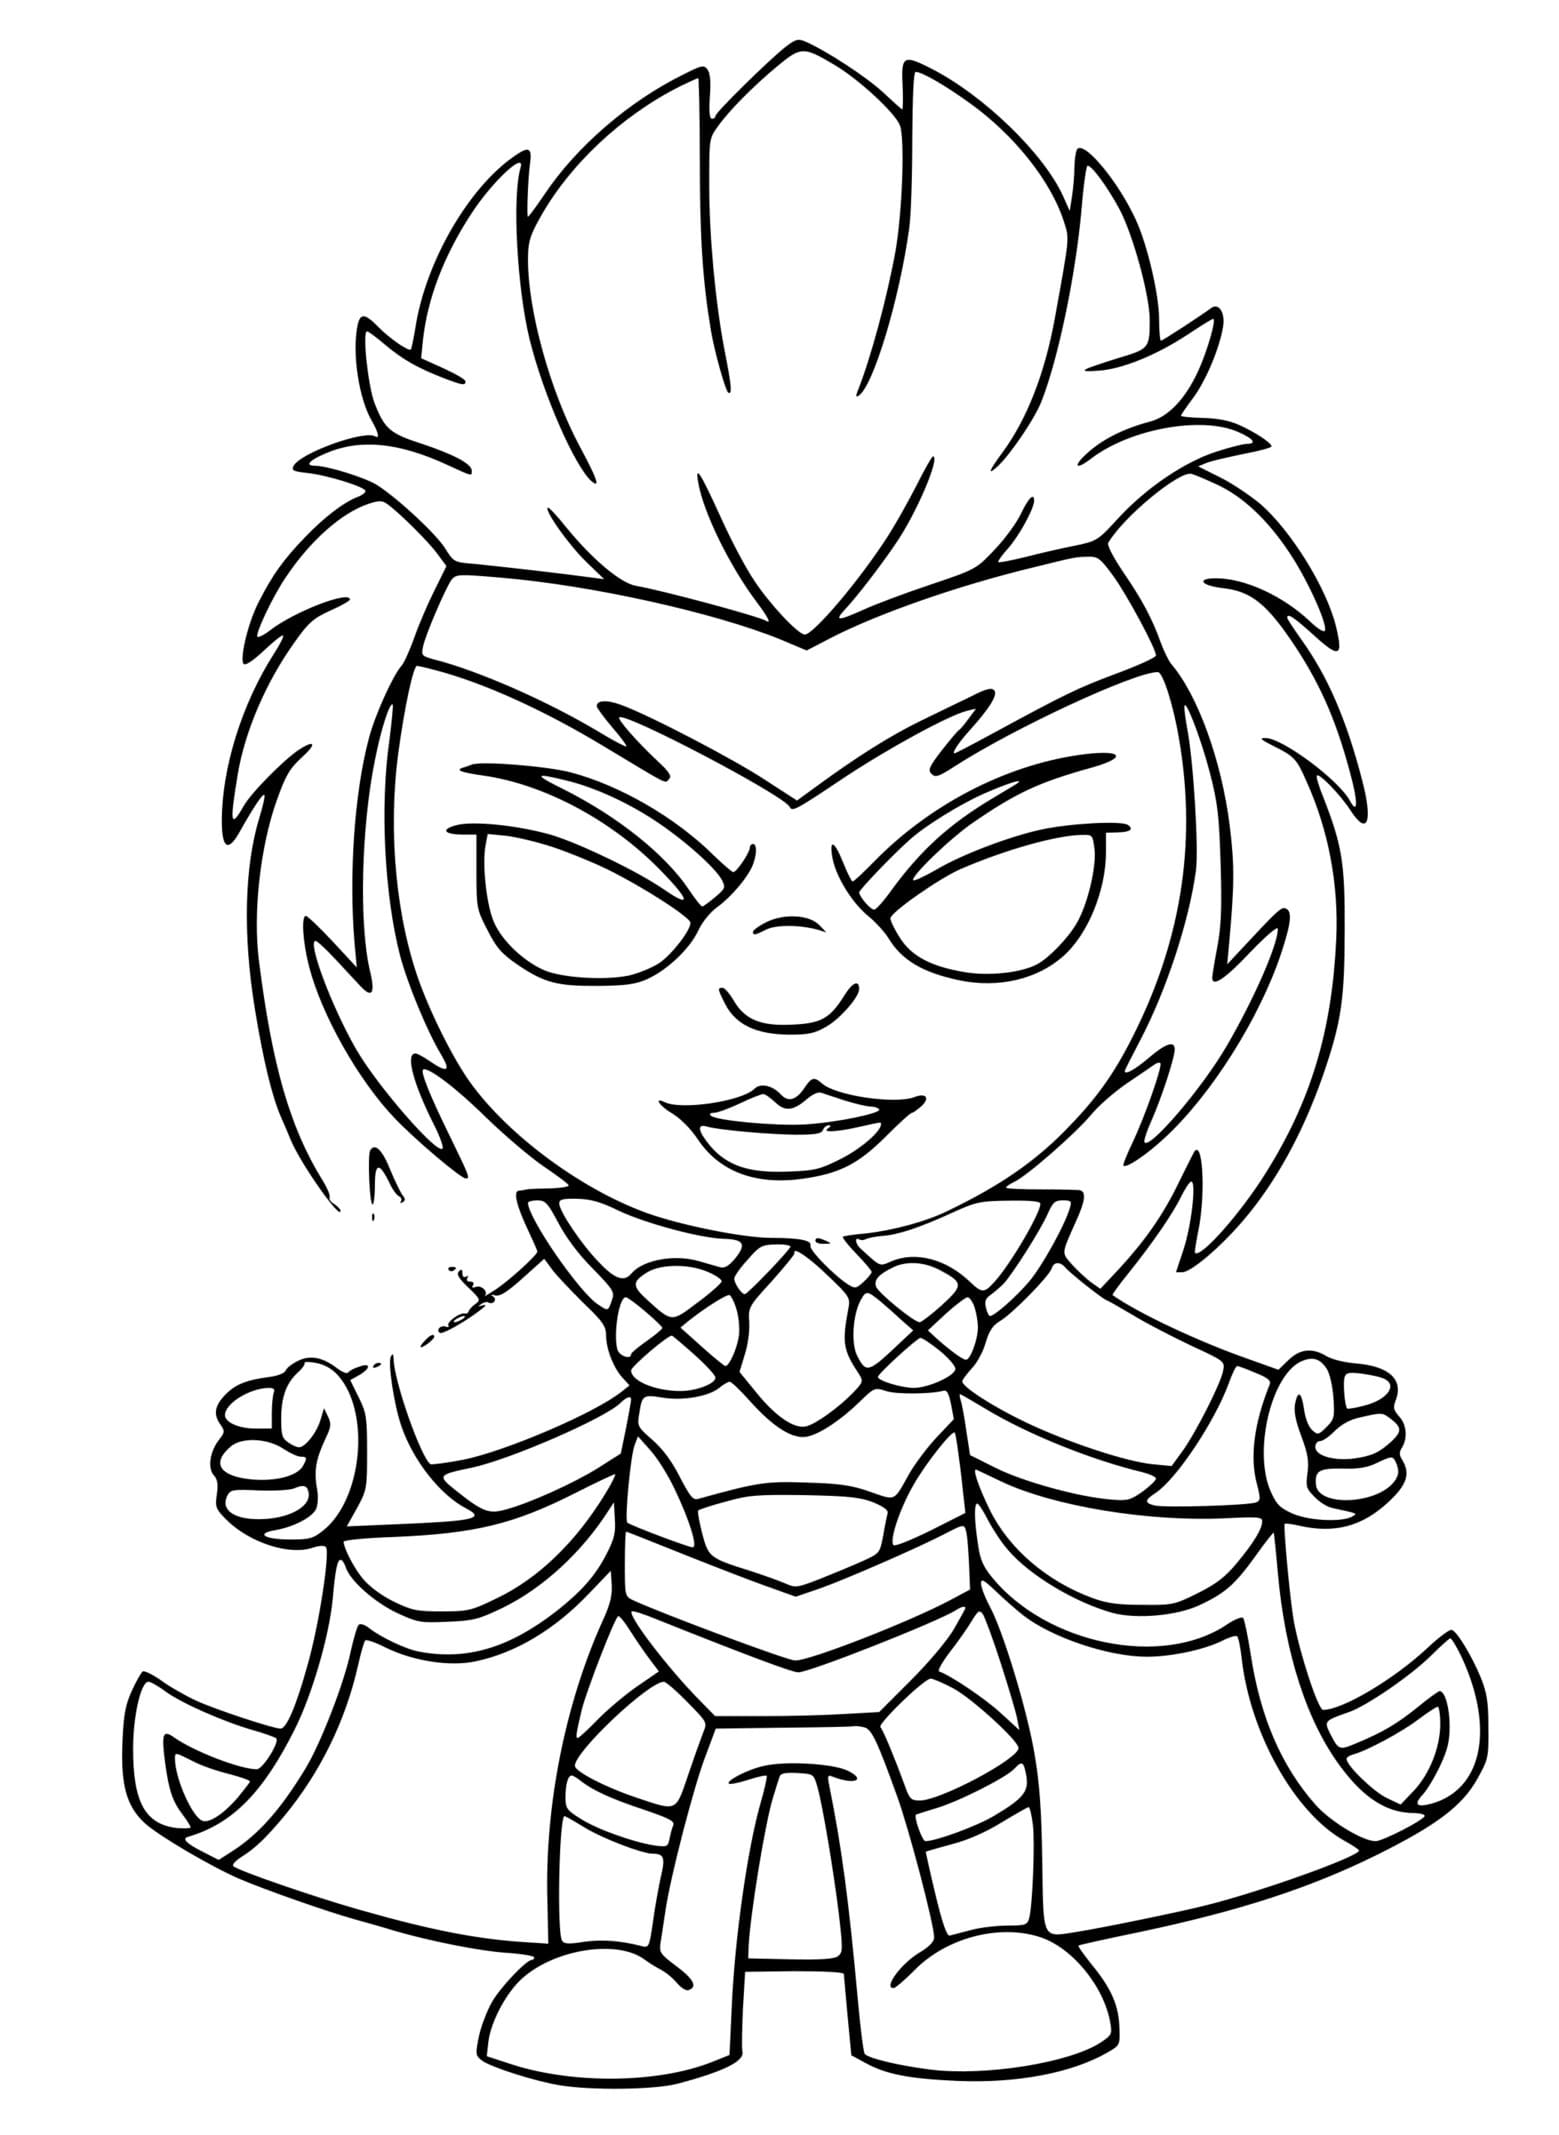 Storm Fortnite Coloring Page